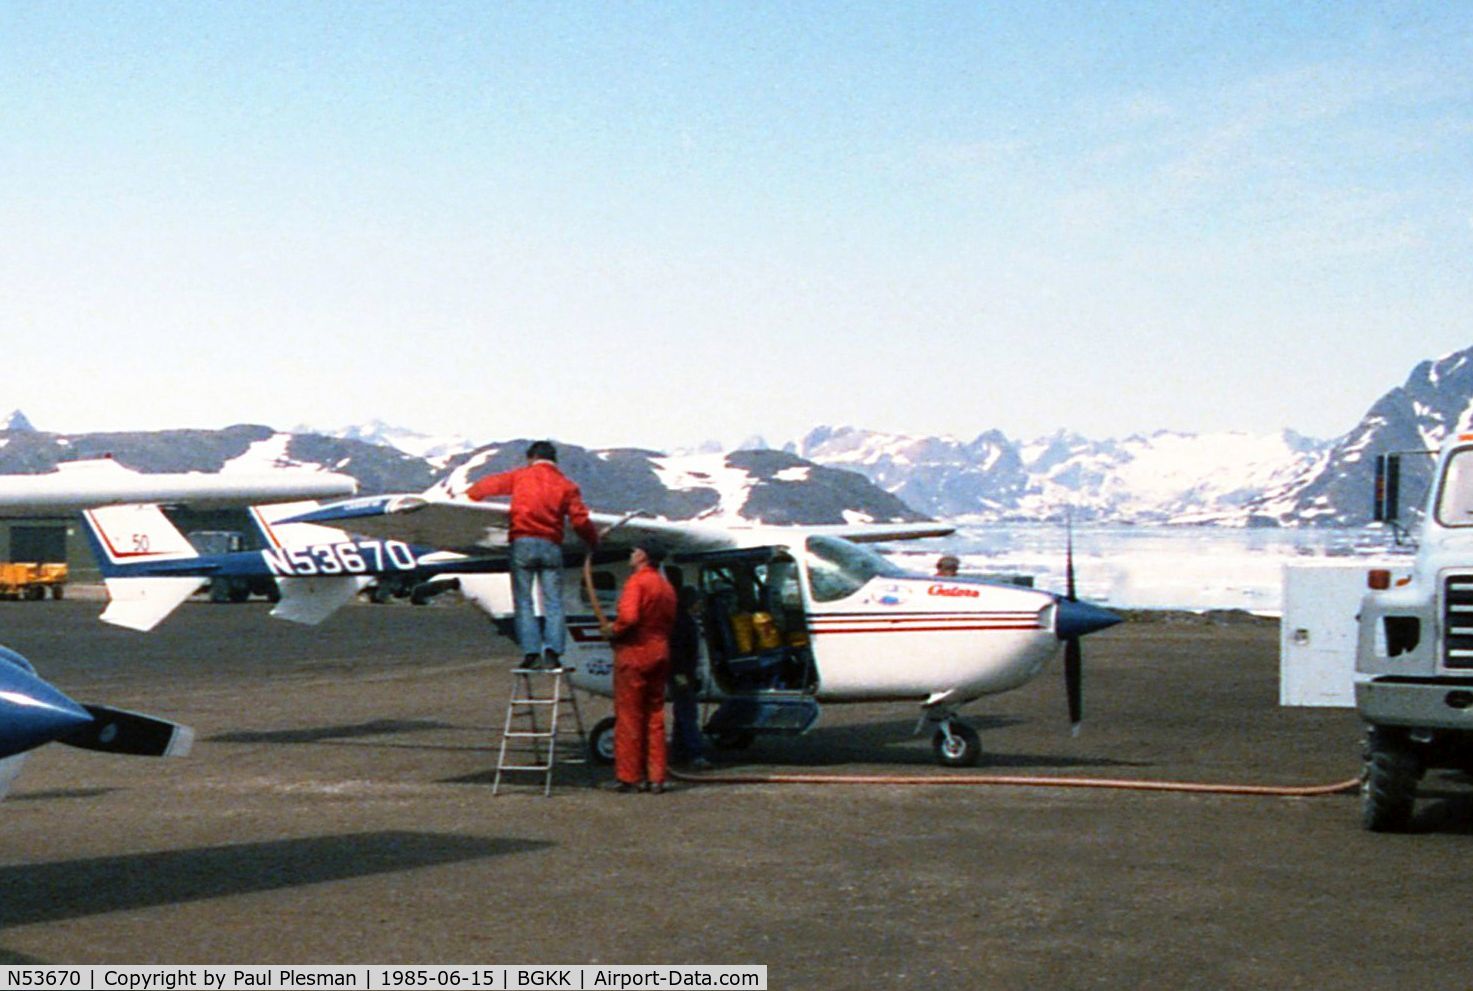 N53670, 1976 Cessna 337G Super Skymaster C/N 33701769, During a refueling stop in Kulusuk, Greenland enroute from Europe to the USA